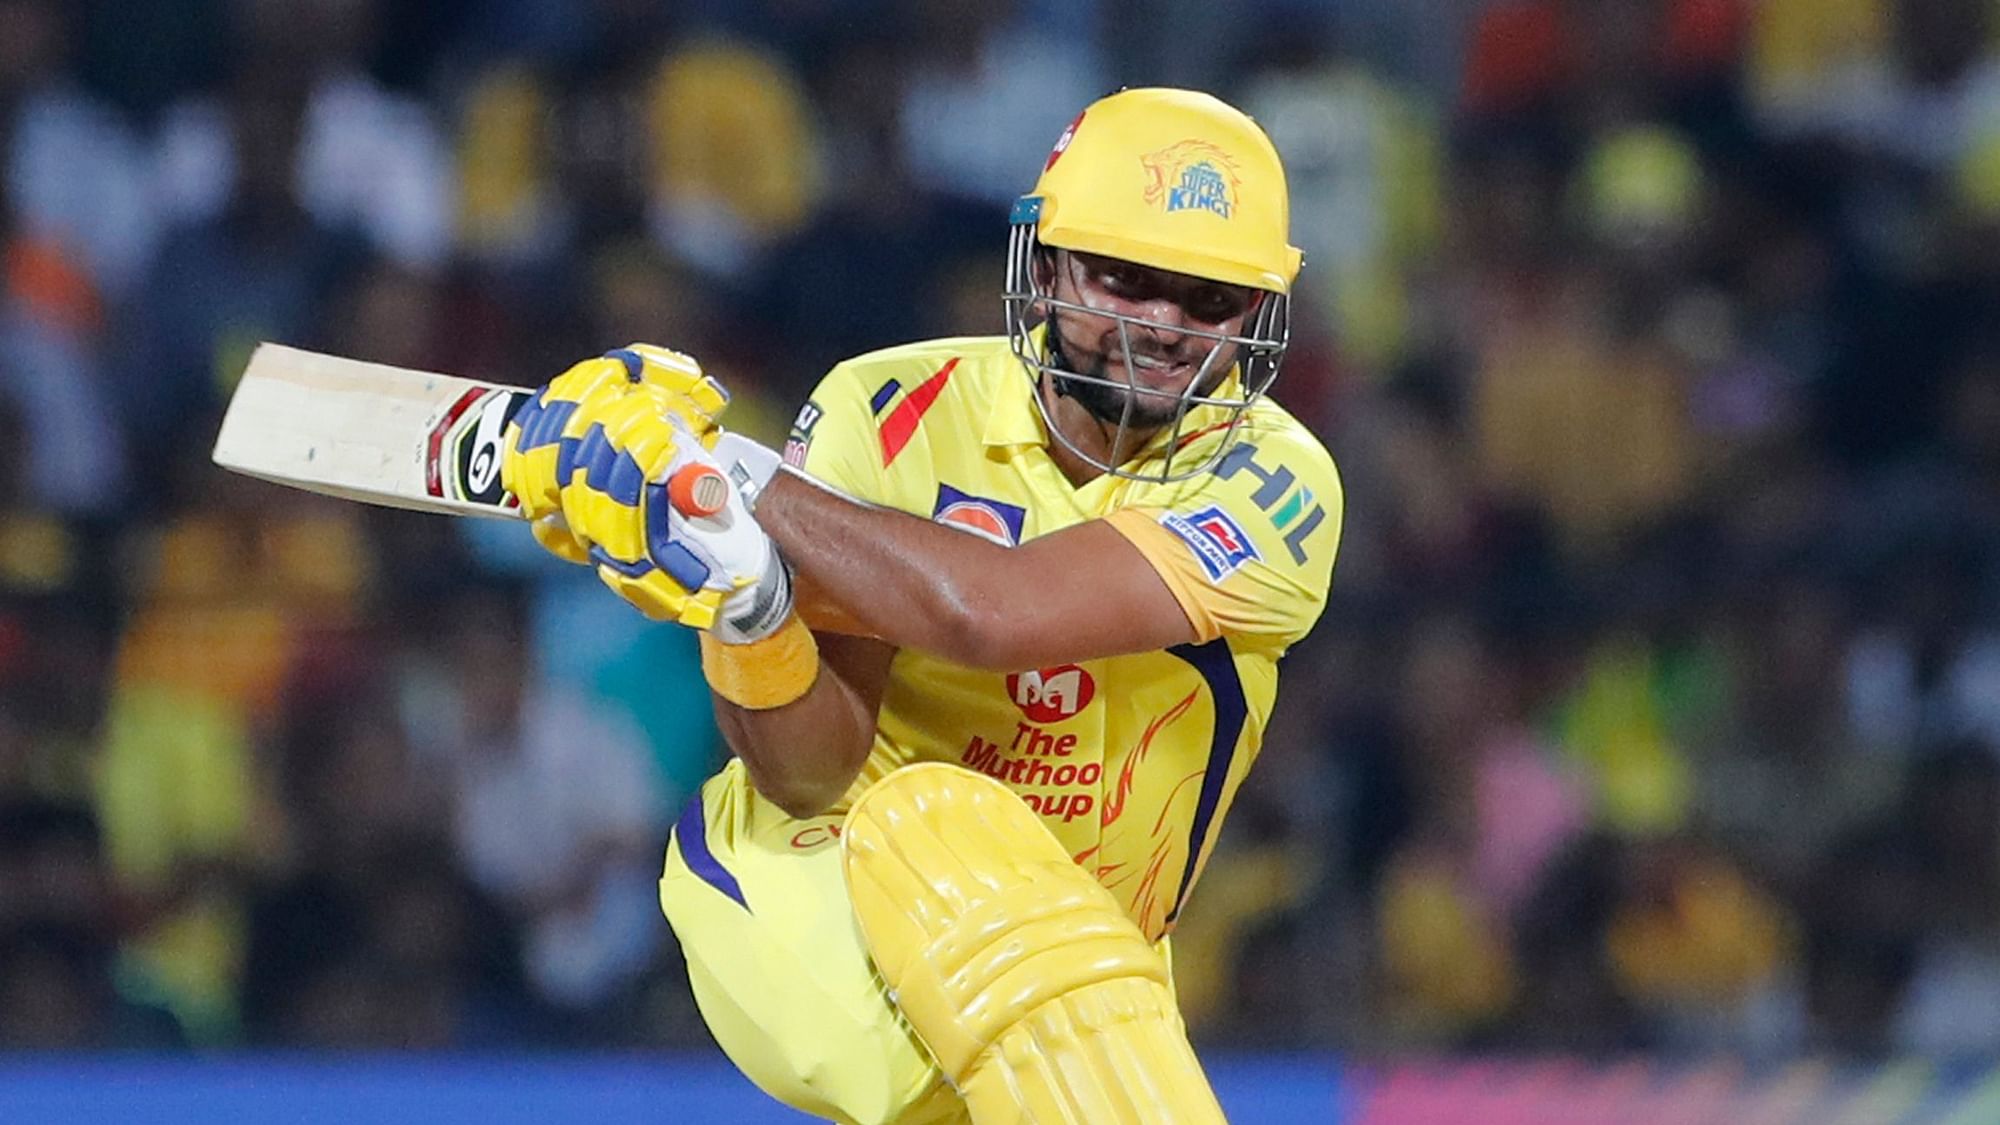 Chennai Super Kings’ Suresh Raina became the first-ever cricketer to score 5,000 runs in the Indian Premier League.